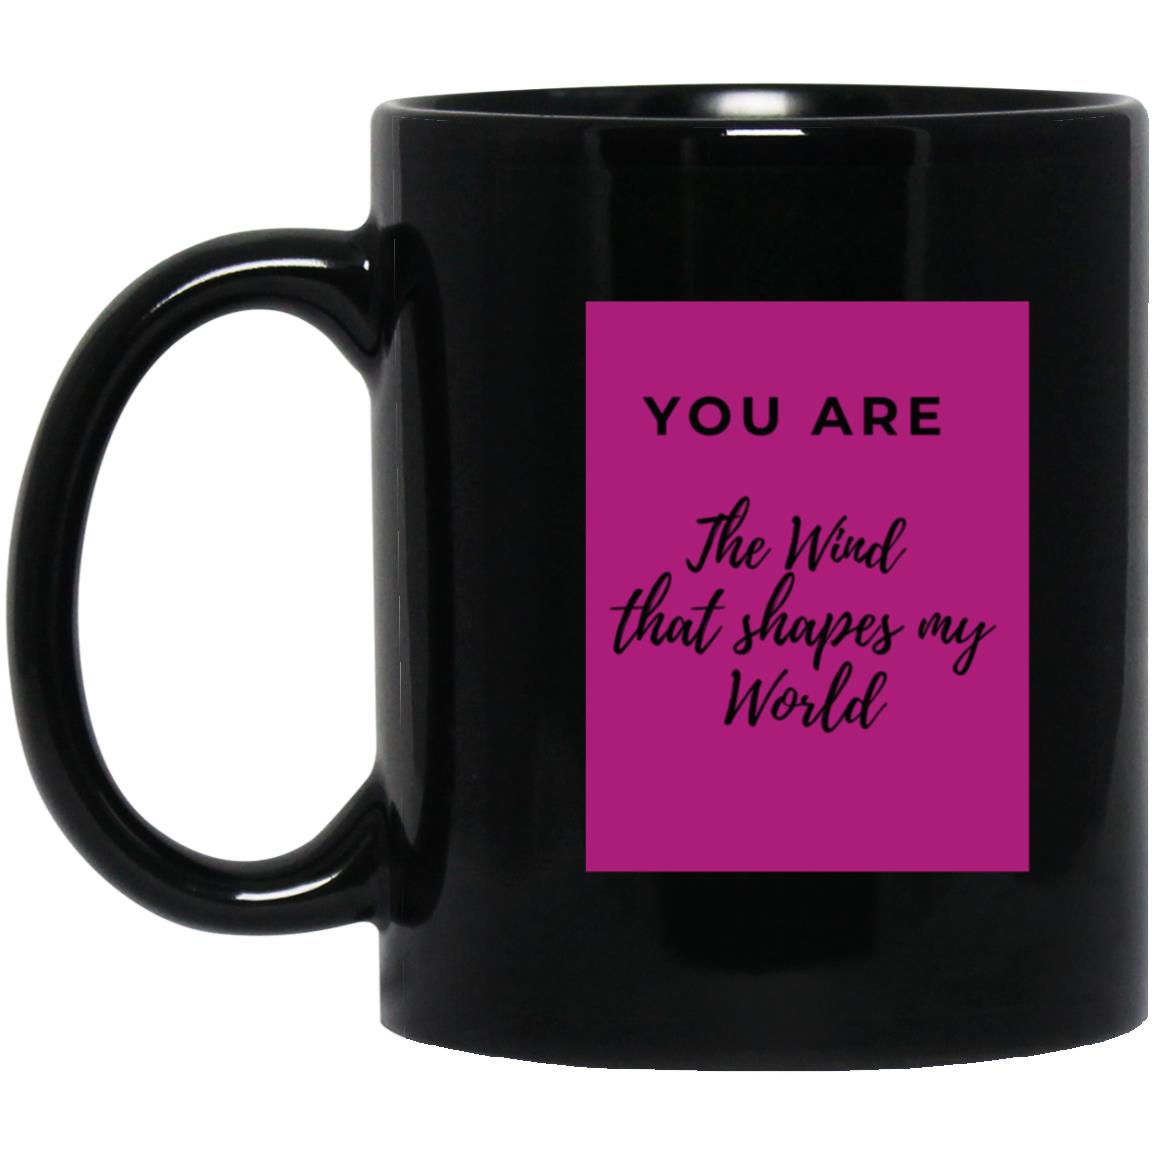 You are the Wind that shapes my world Mugs - Group 3